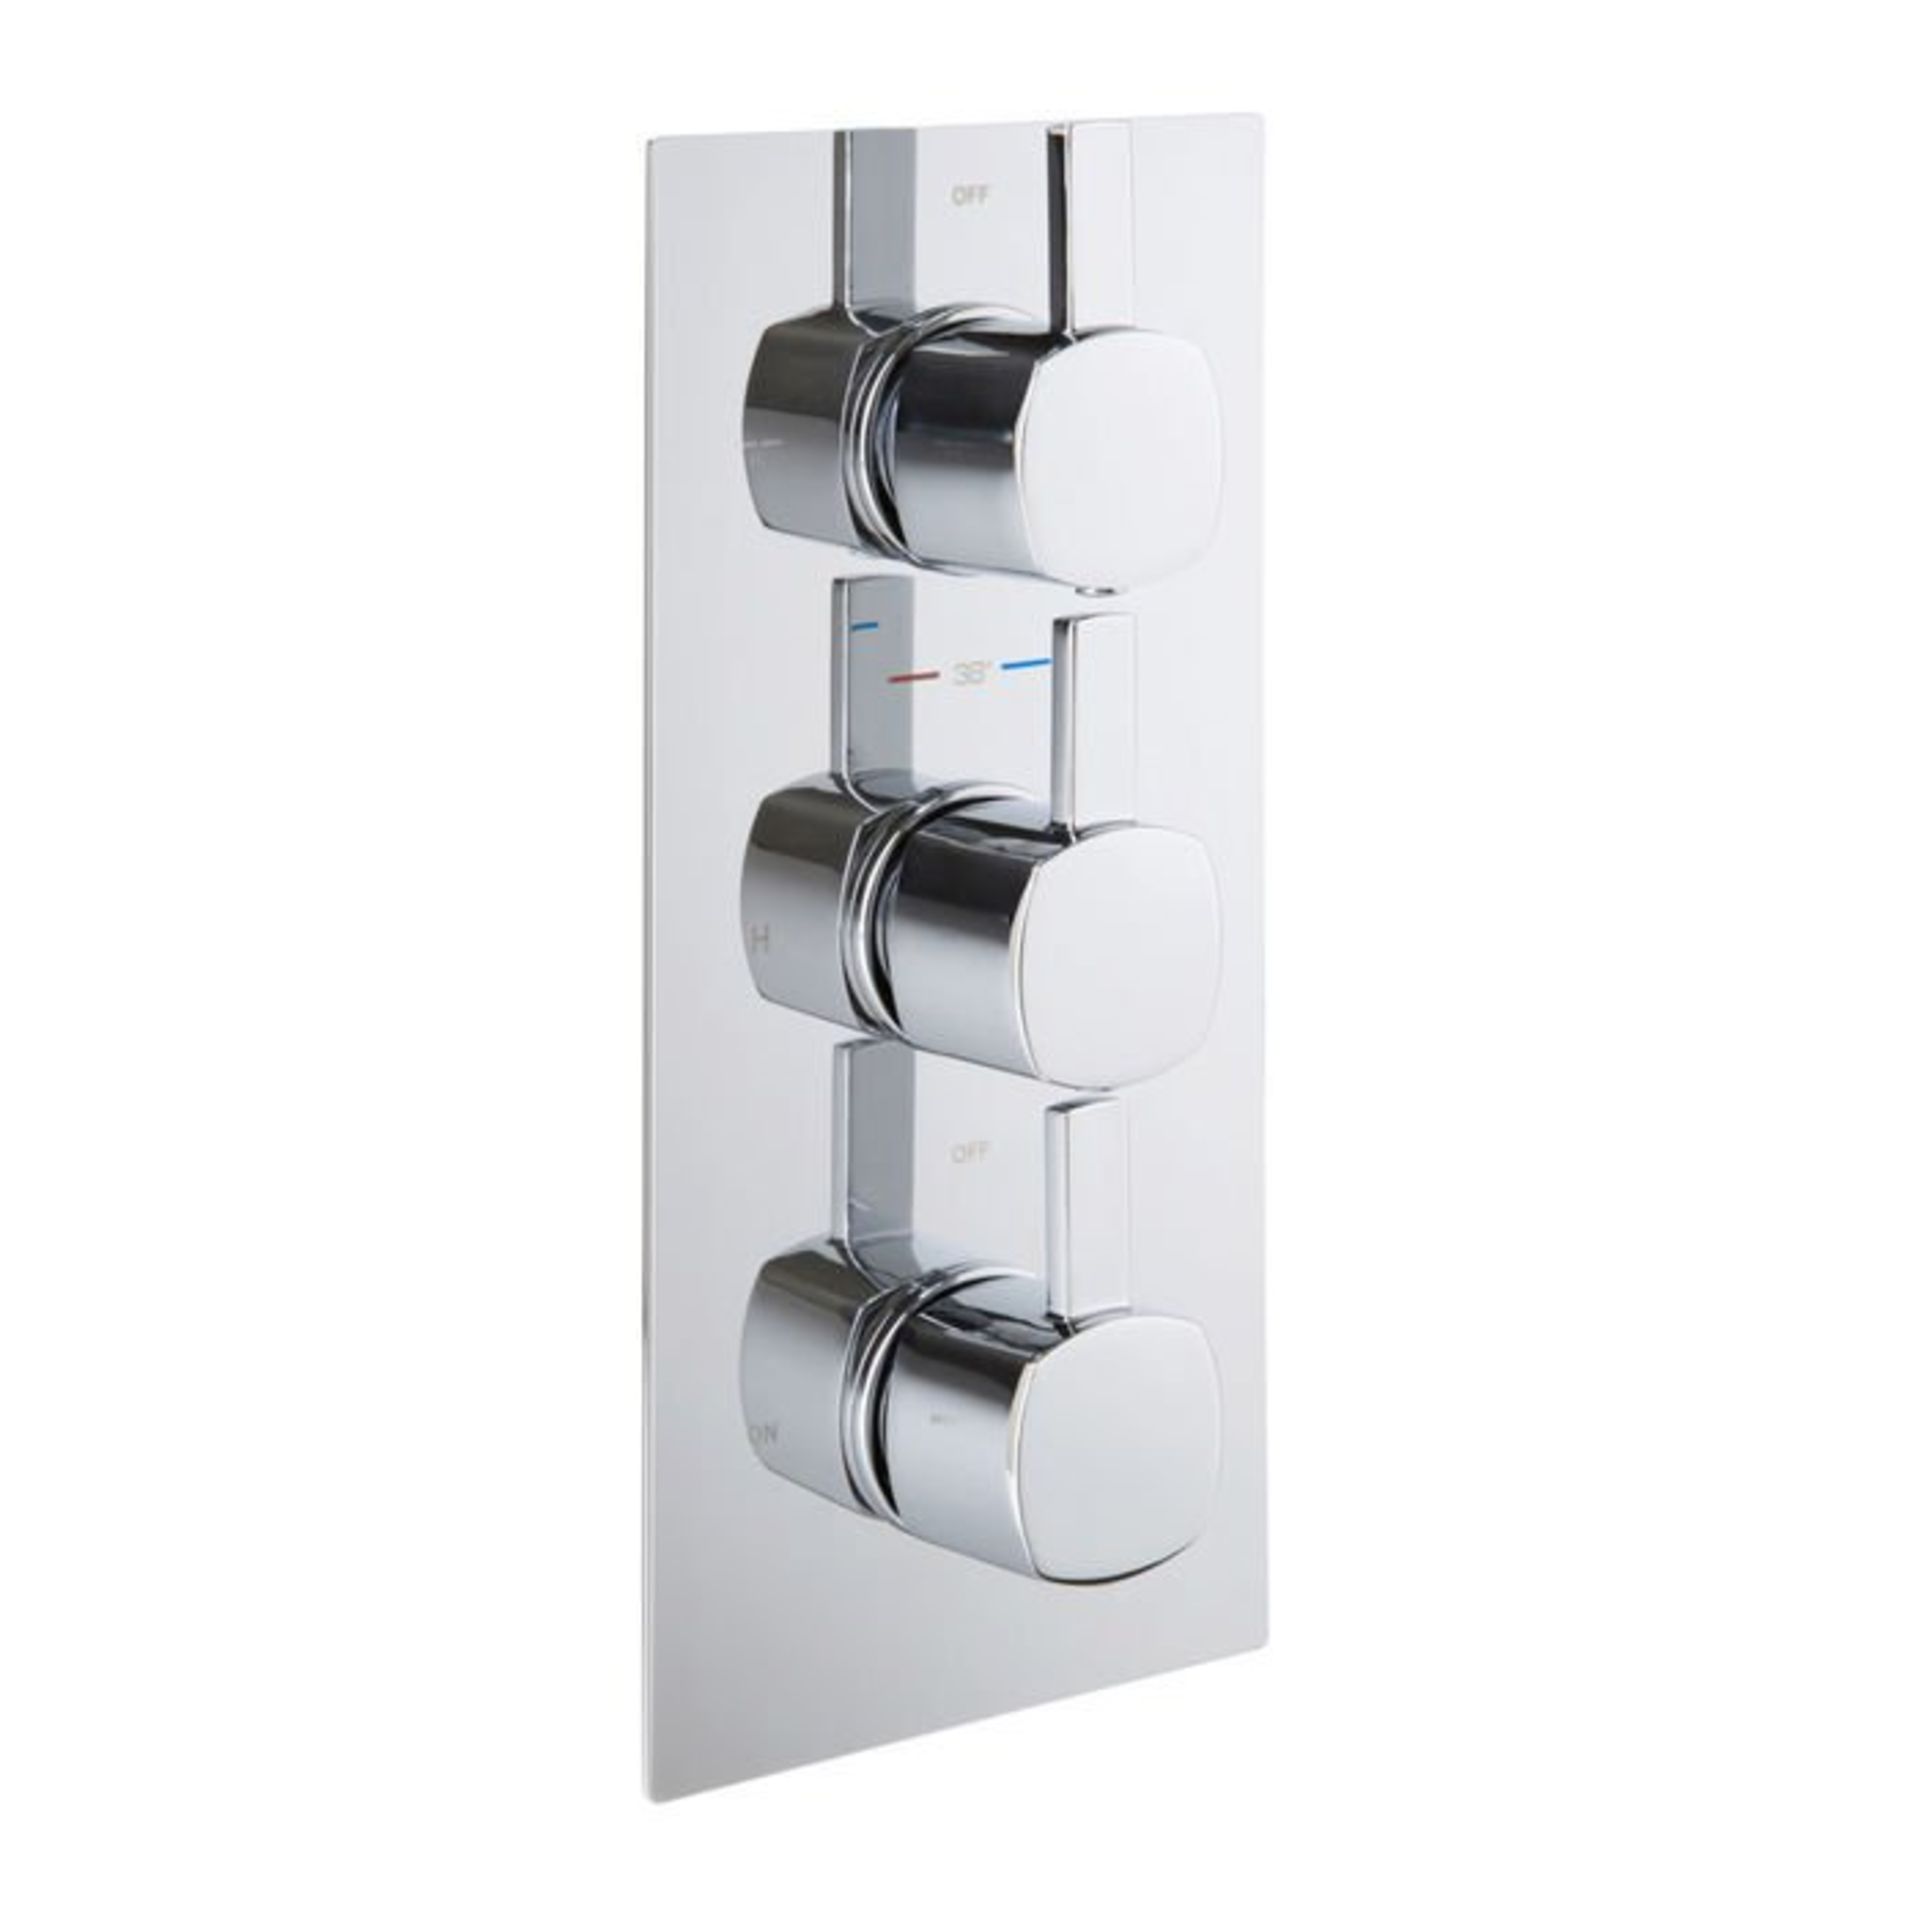 (A178) Round Three Way Concealed Valve. RRP £349.99. Chrome plated solid brass Built in anti-